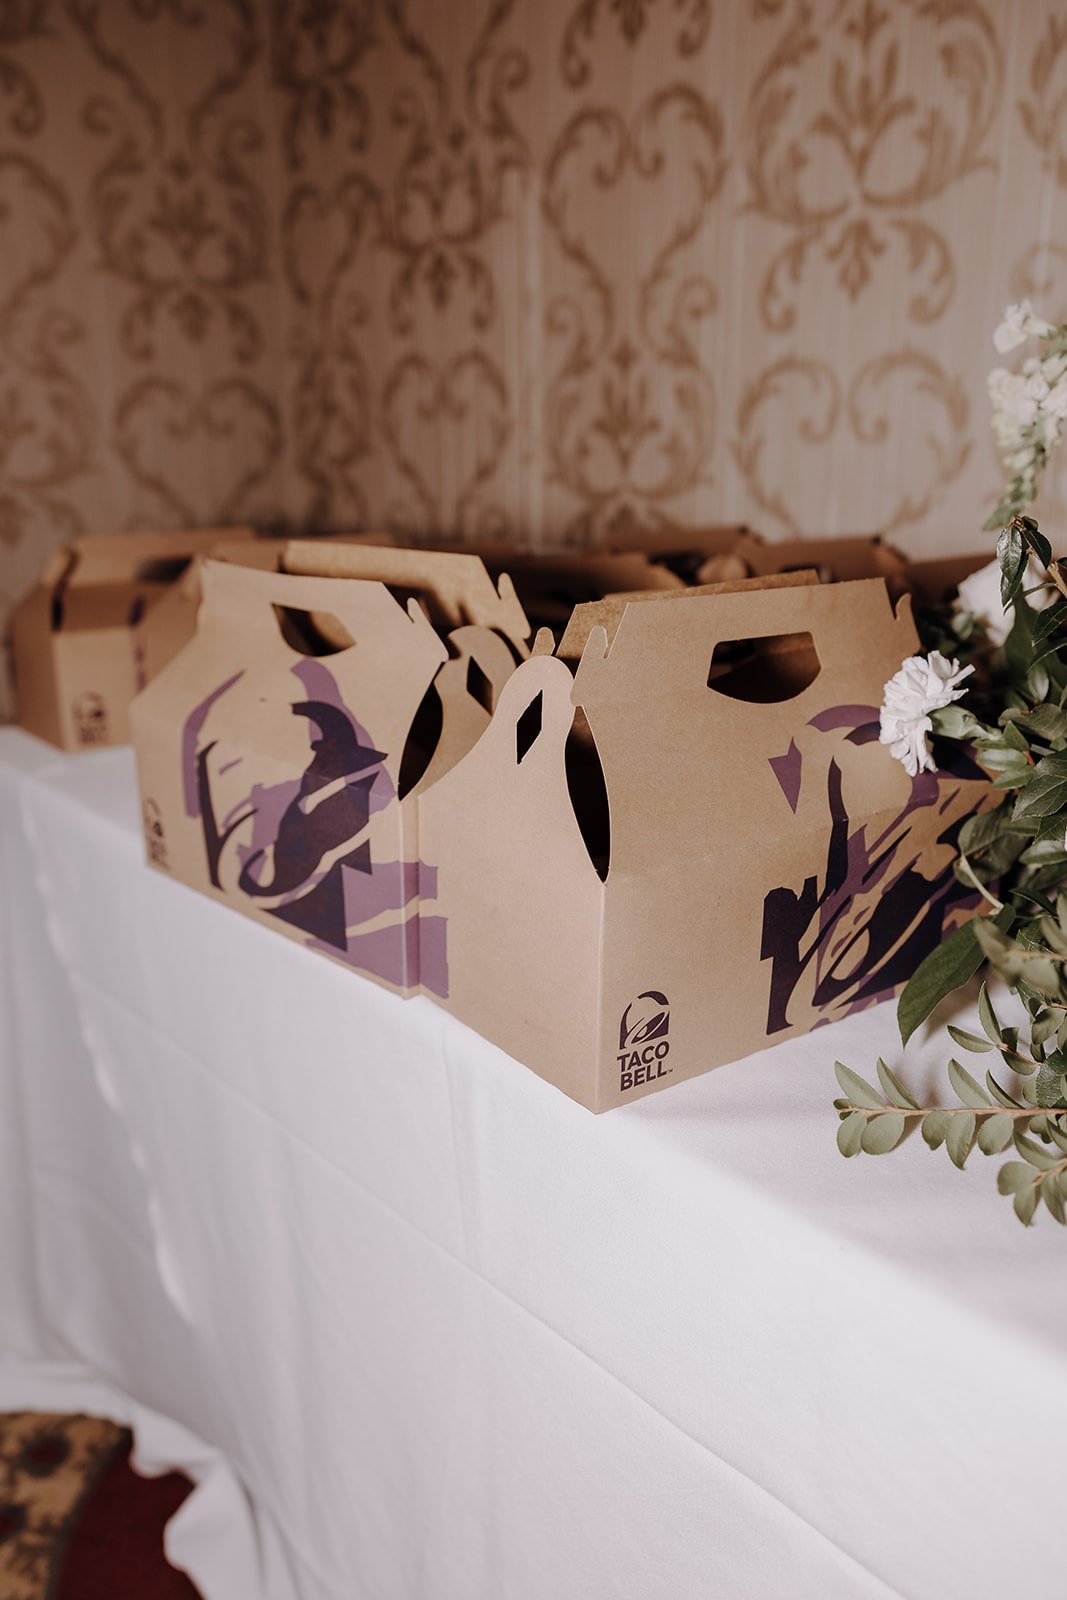 Taco Bell take away boxes at luxury wedding reception in California